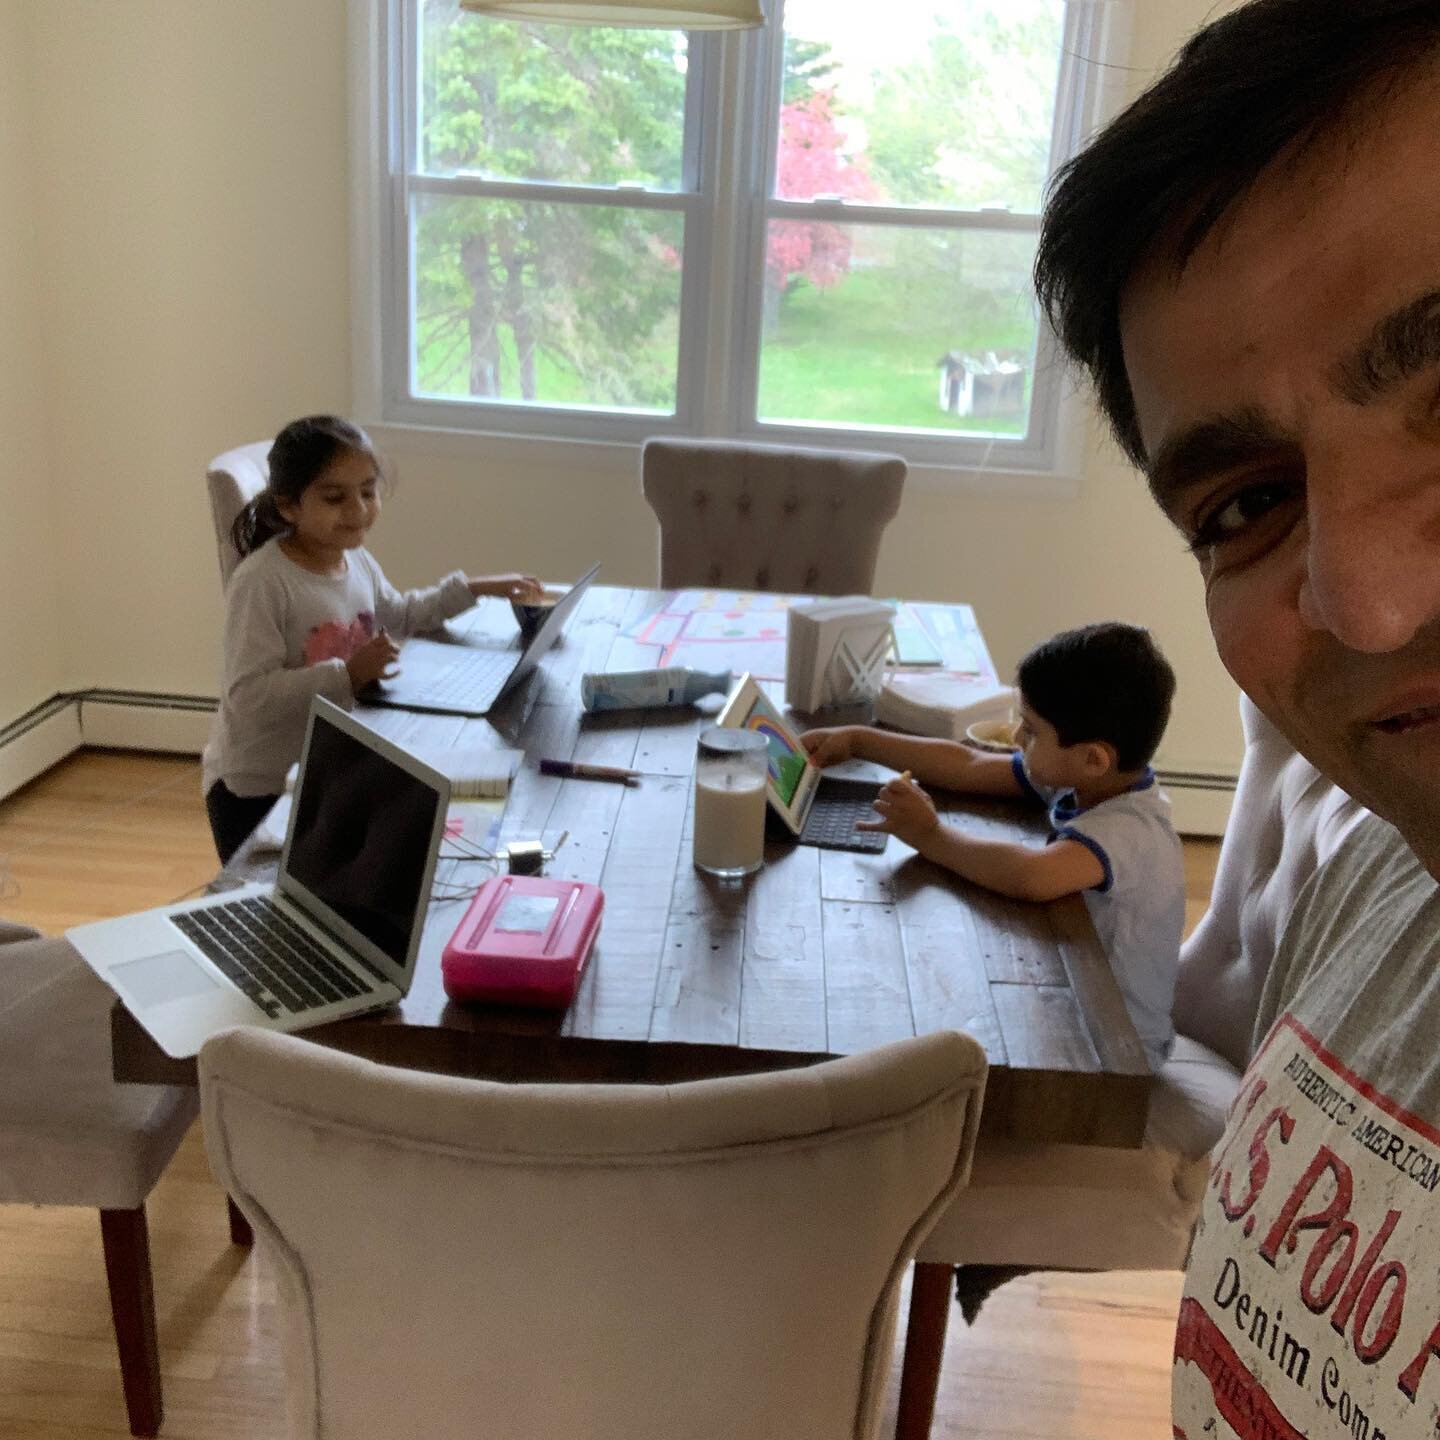 My co-working space with my two amazing kids. We learn and grow together. Krupa has her zoom calls and play dates. They join my zoom calls regularly. He loves listening and asking questions. These moments will be cherished for long. #sweetmoments #jo